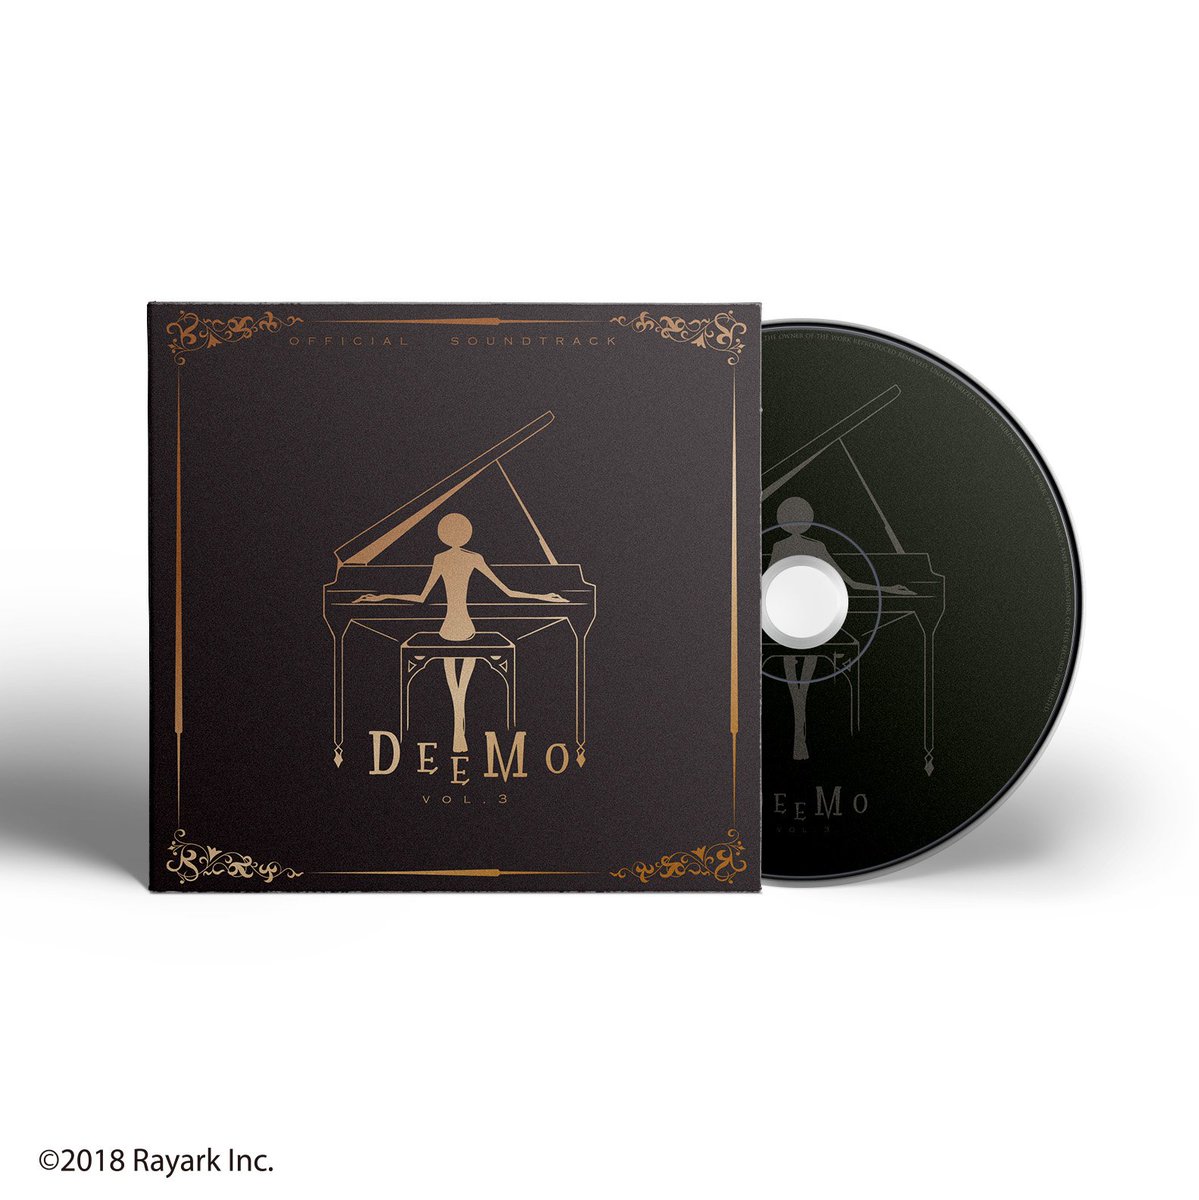 Release “Deemo Official Soundtrack vol.3” by Rayark Games - Cover